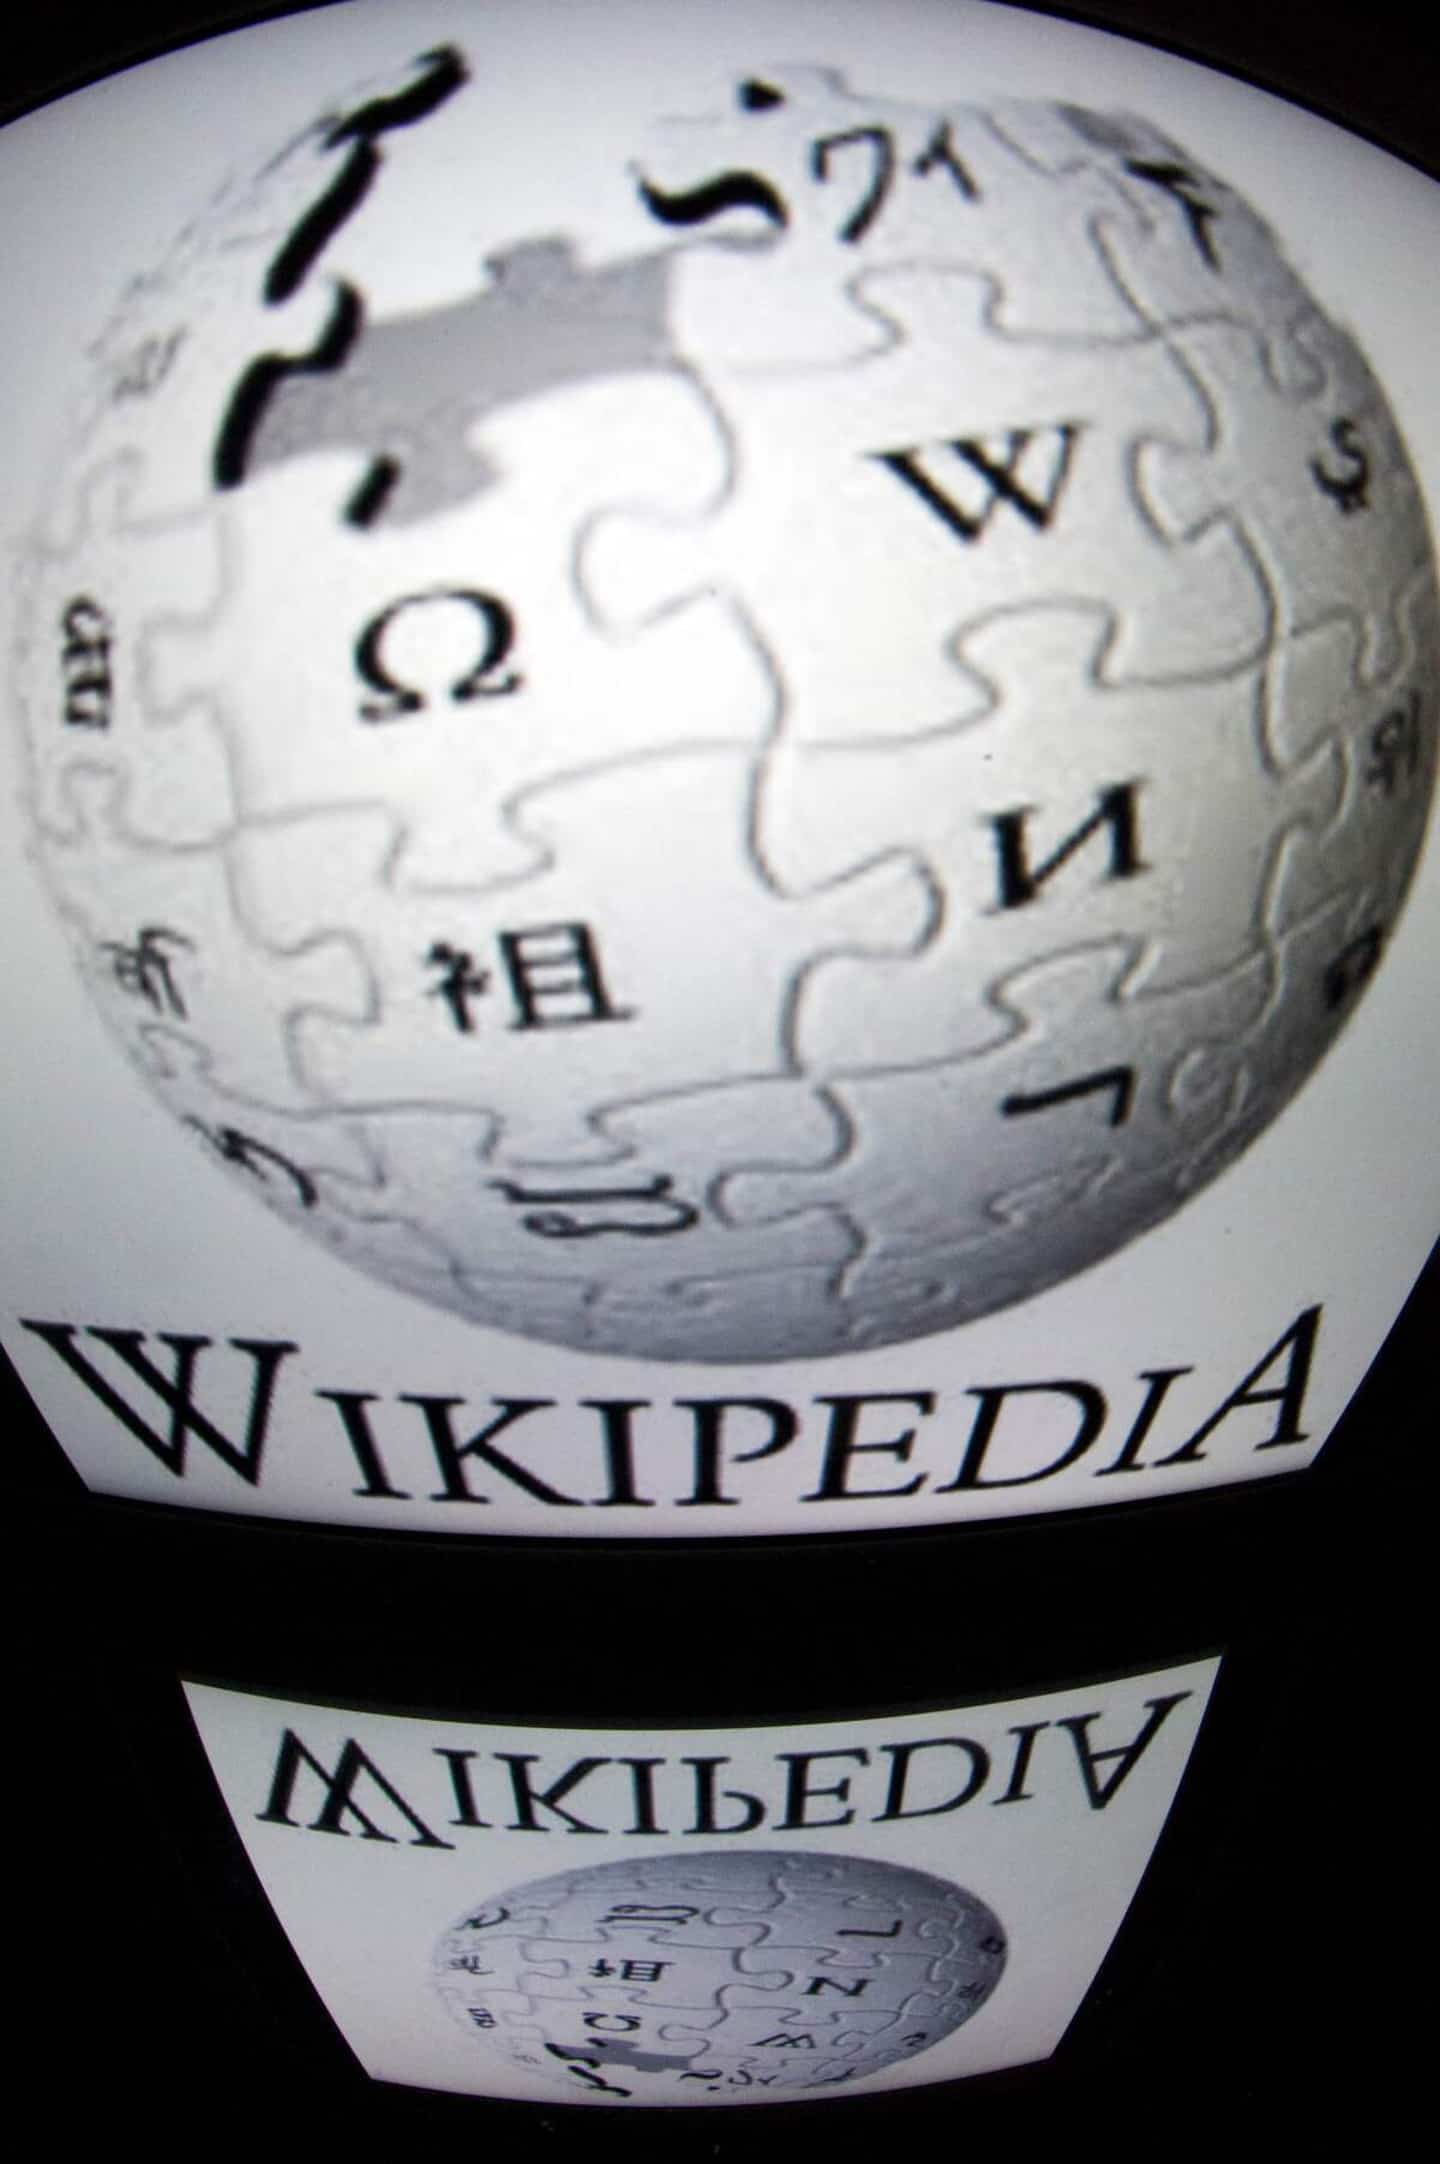 Wikimedia denies having evidence of 'infiltration' by Saudi authorities